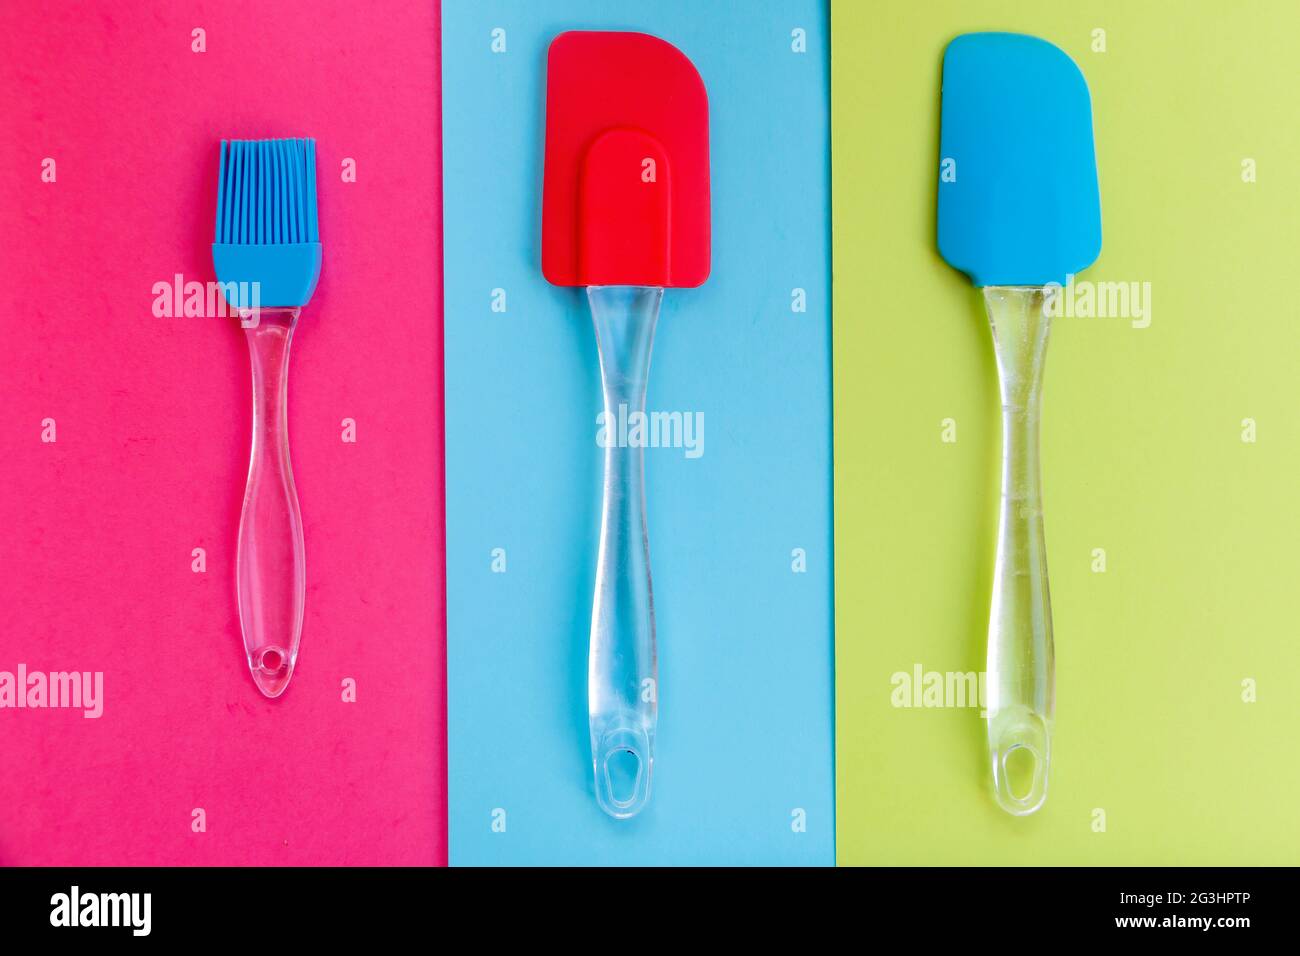 Silicone kitchen utensils on a tricolor background Stock Photo